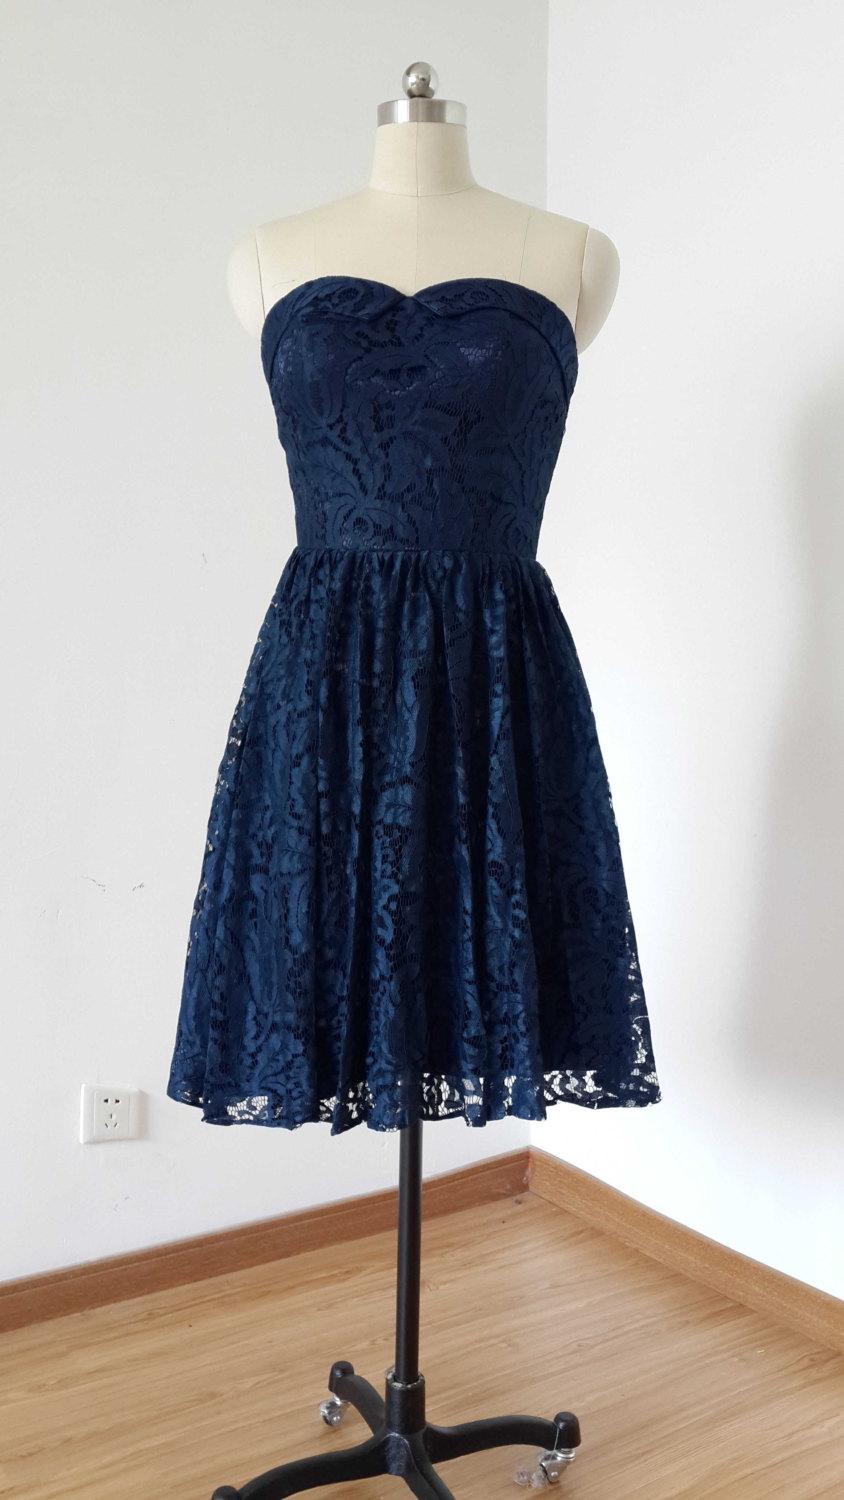 Mariage - 2015 A-line Sweetheart Navy Blue Lace Short Bridesmaid Dress